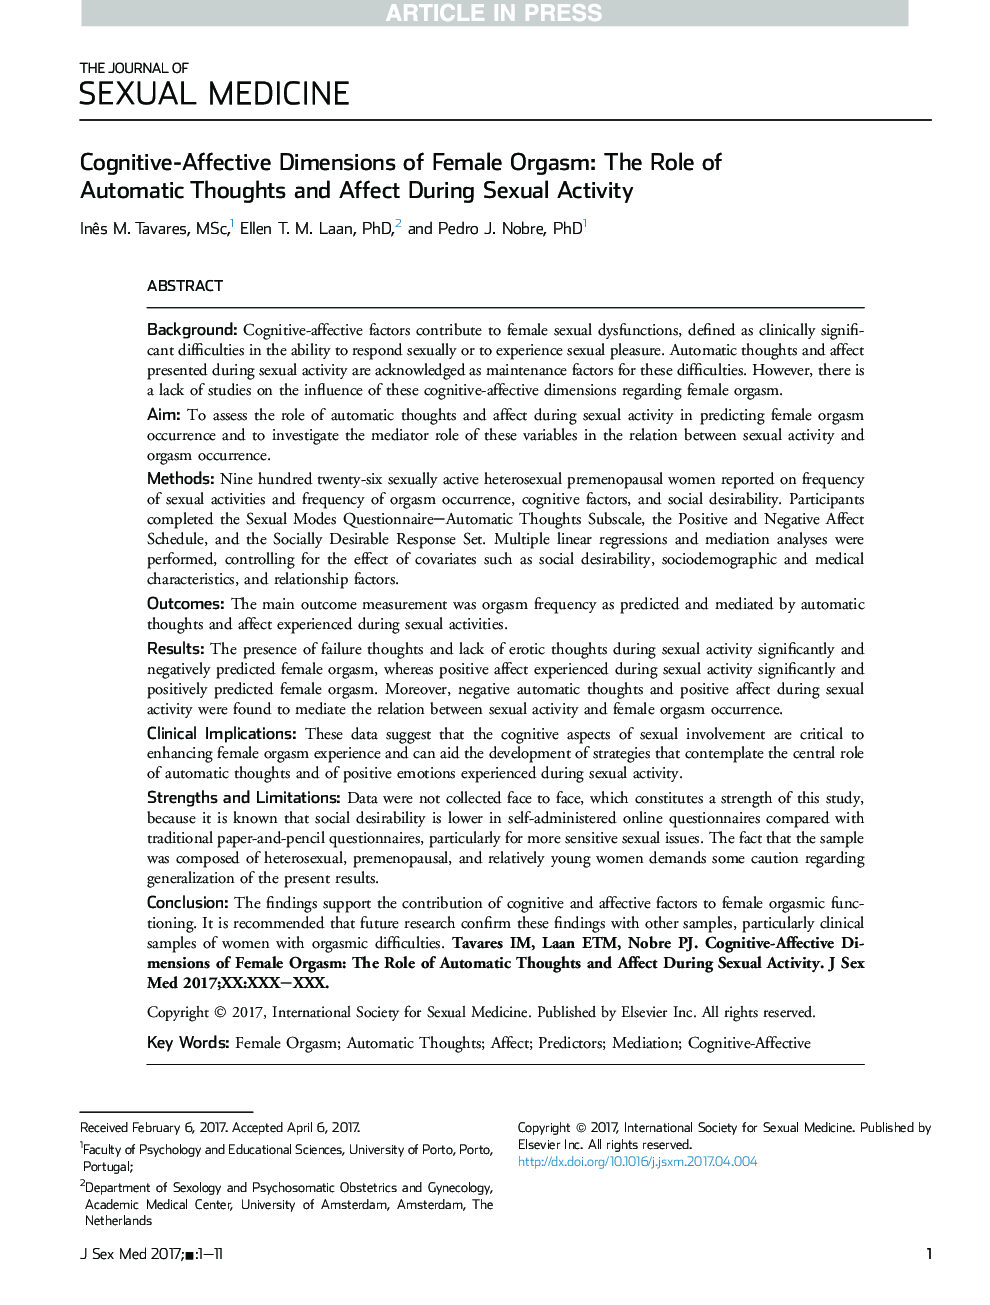 Cognitive-Affective Dimensions of Female Orgasm: The Role of Automatic Thoughts and Affect During Sexual Activity